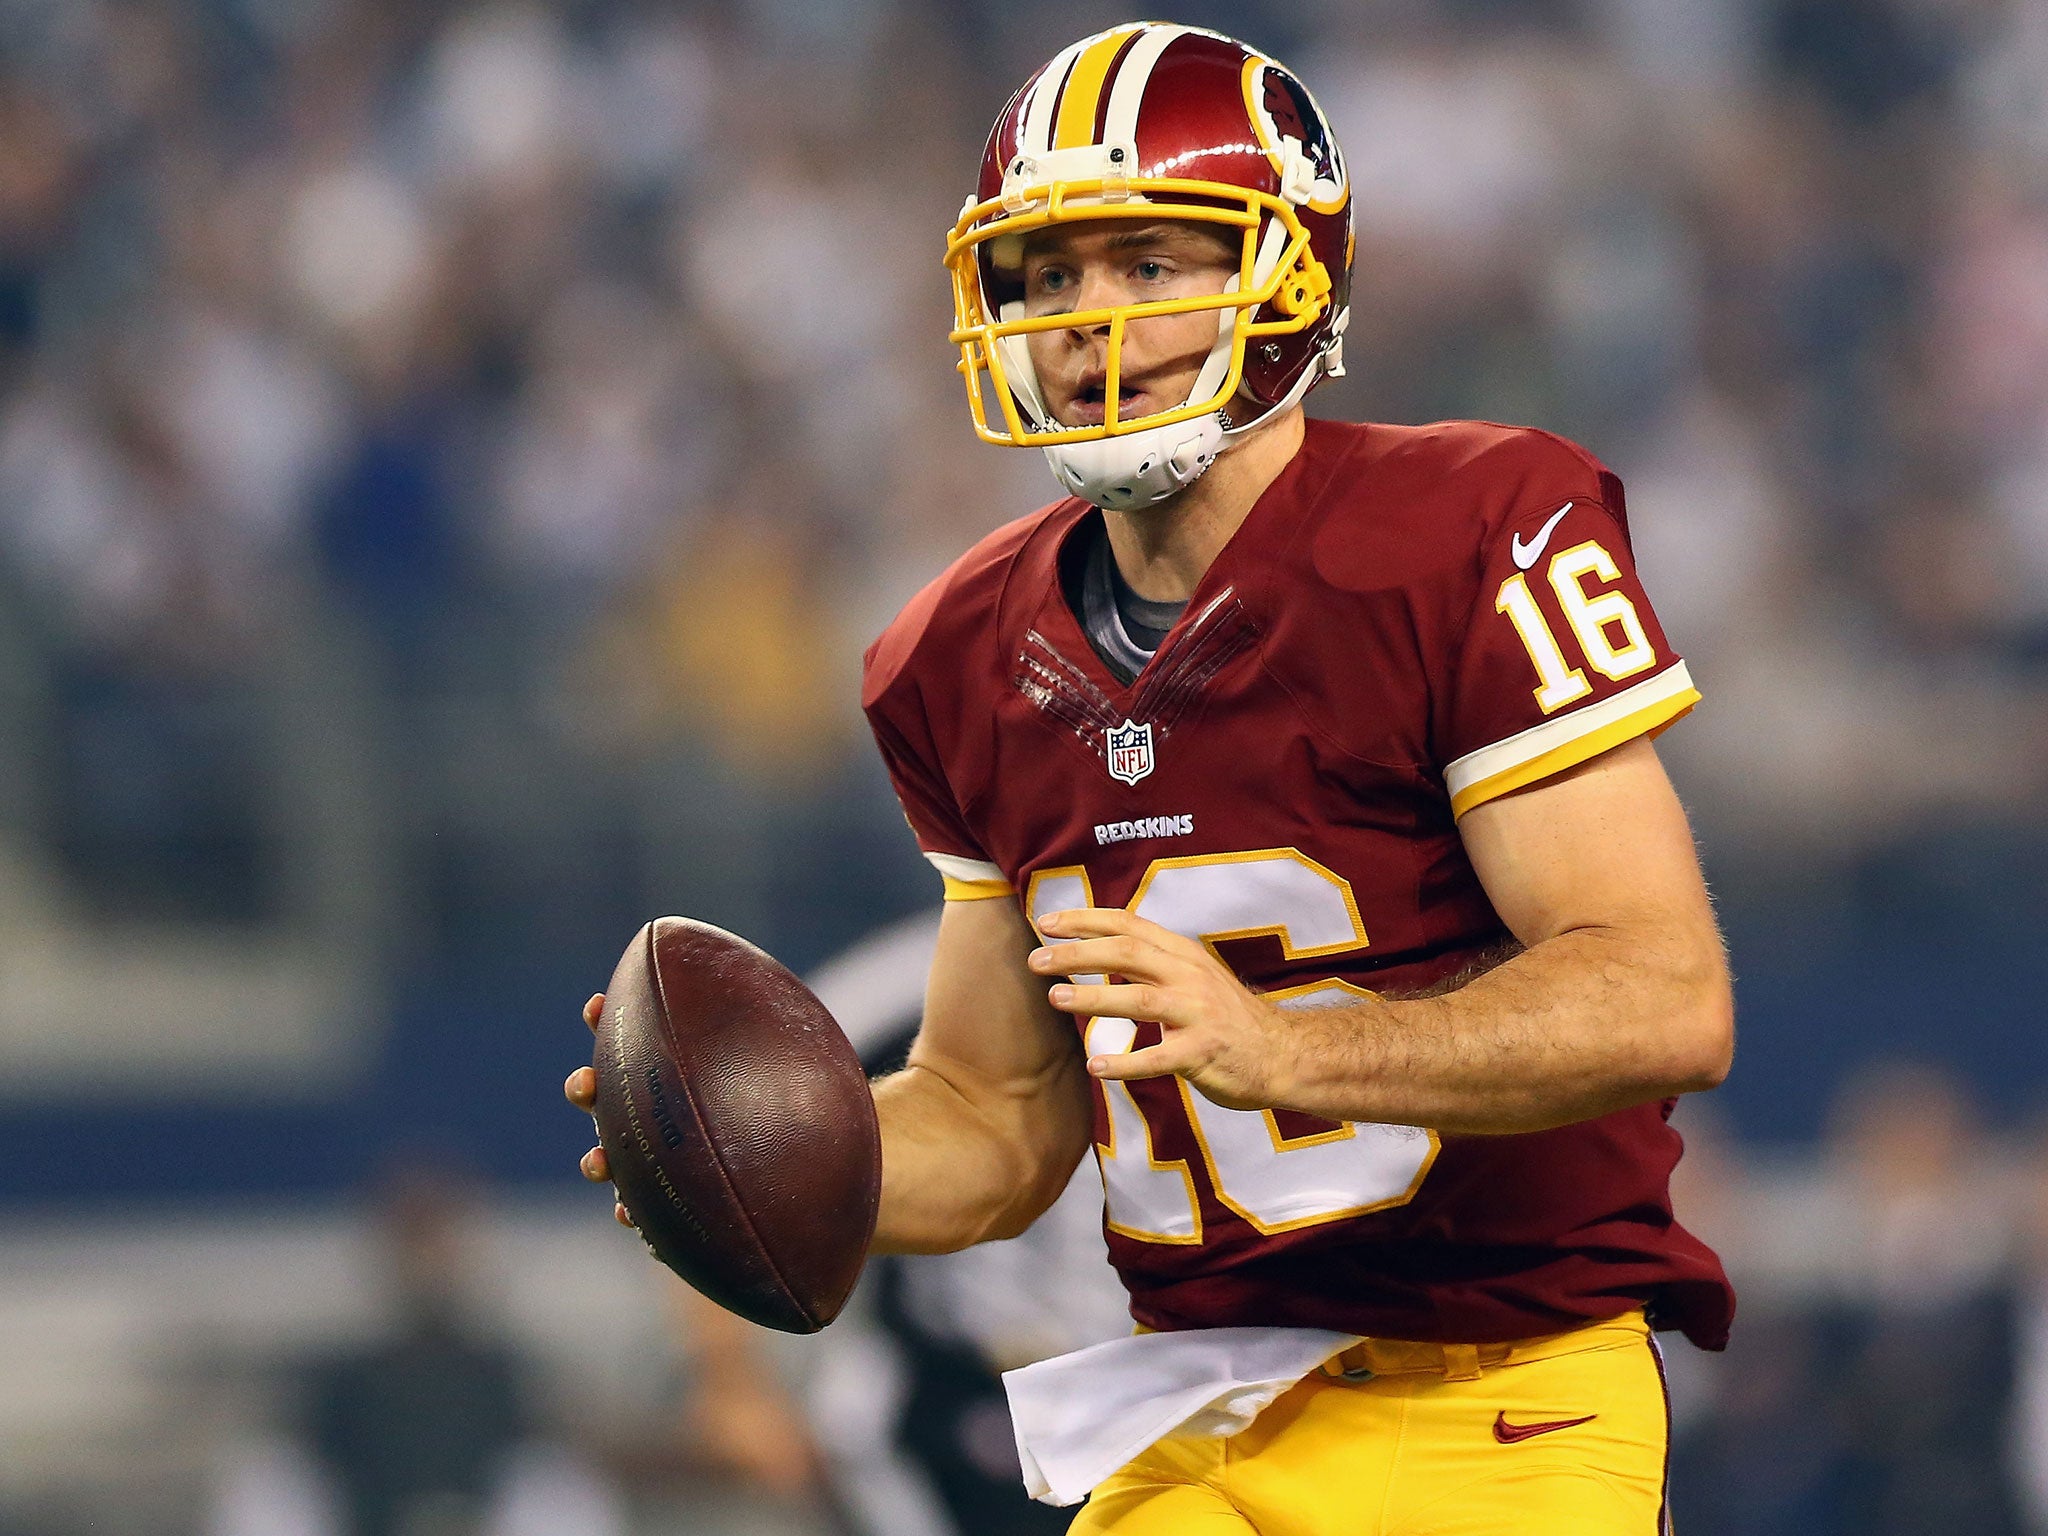 Colt McCoy starred for the Redskins after replacing Kirk Cousins against the Cowboys